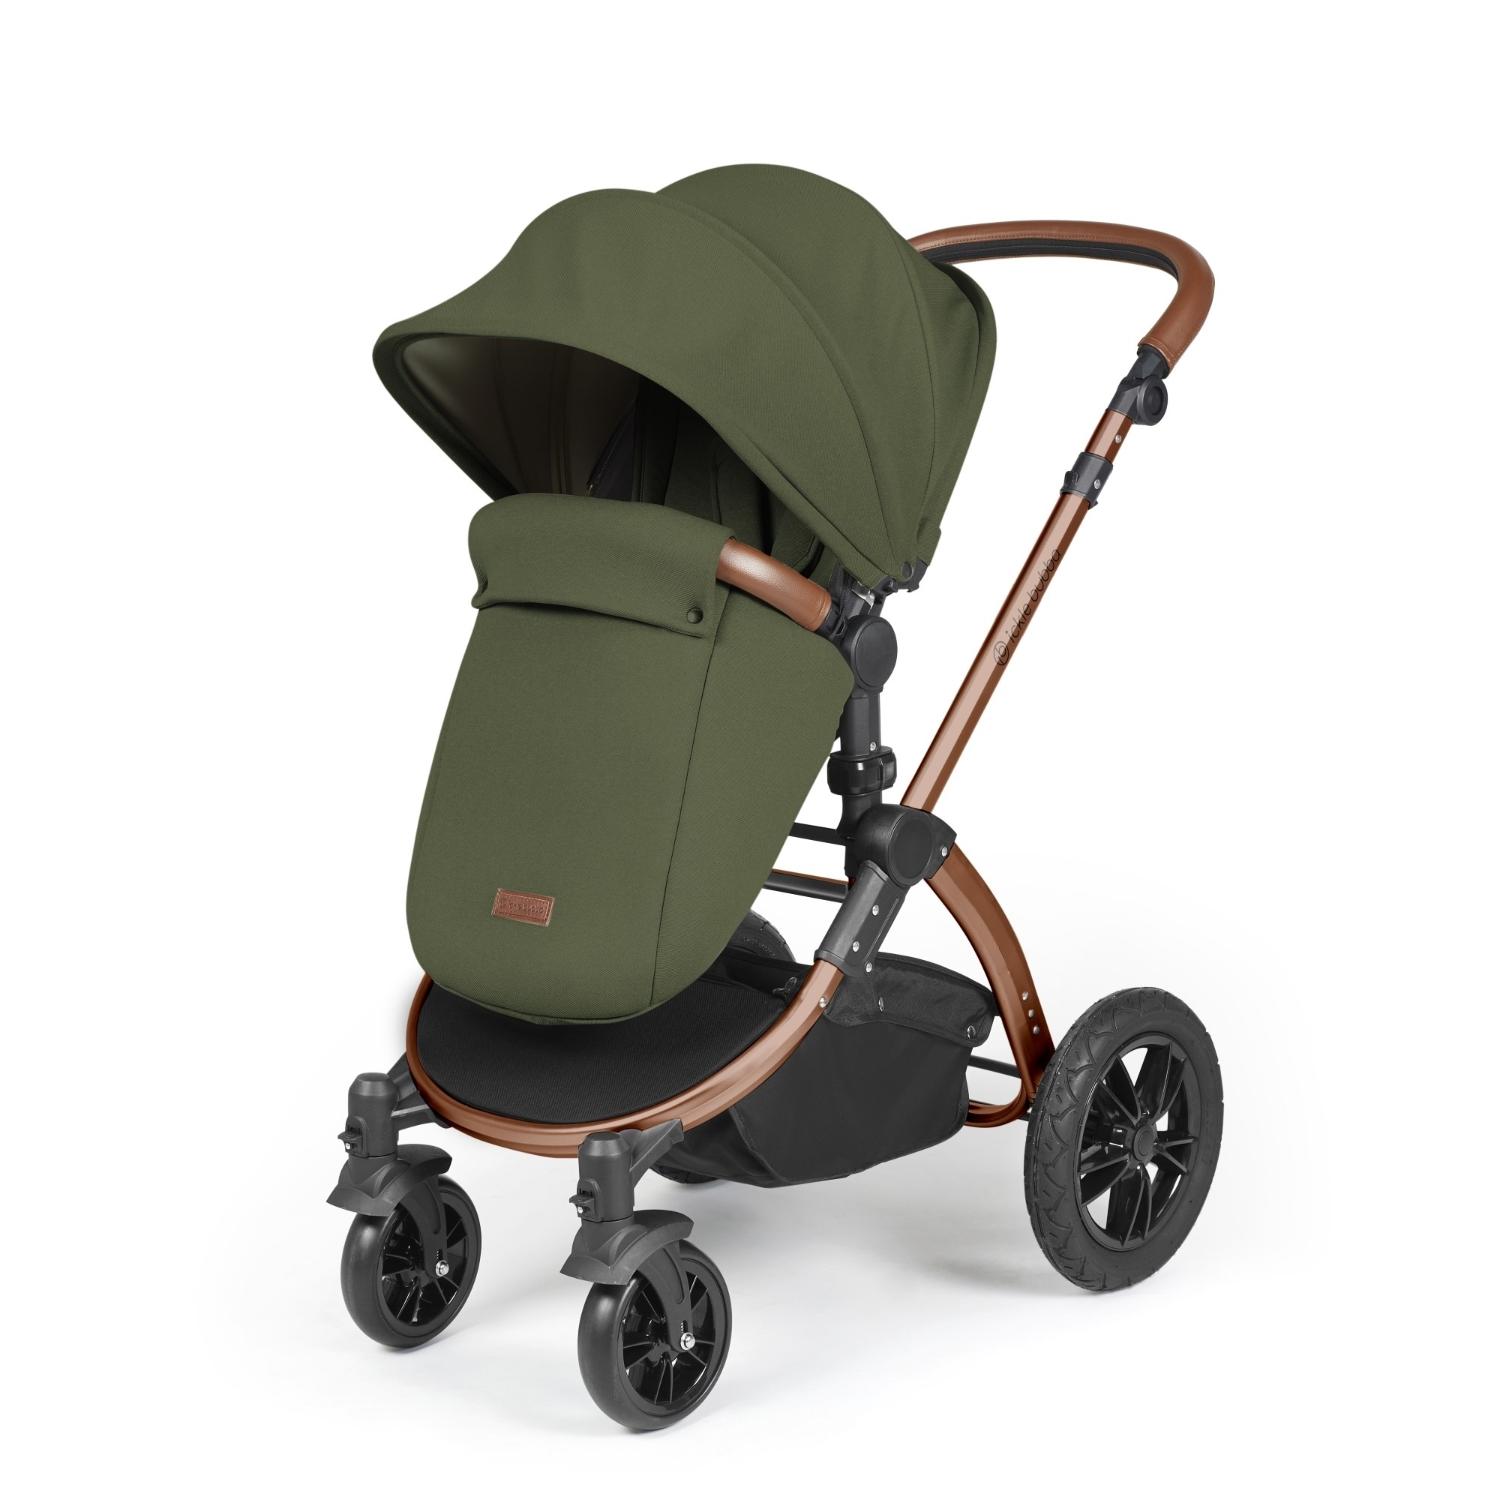 Ickle Bubba Stomp Luxe Pushchair with foot warmer attached in Woodland green colour with bronze chassis and tan handle